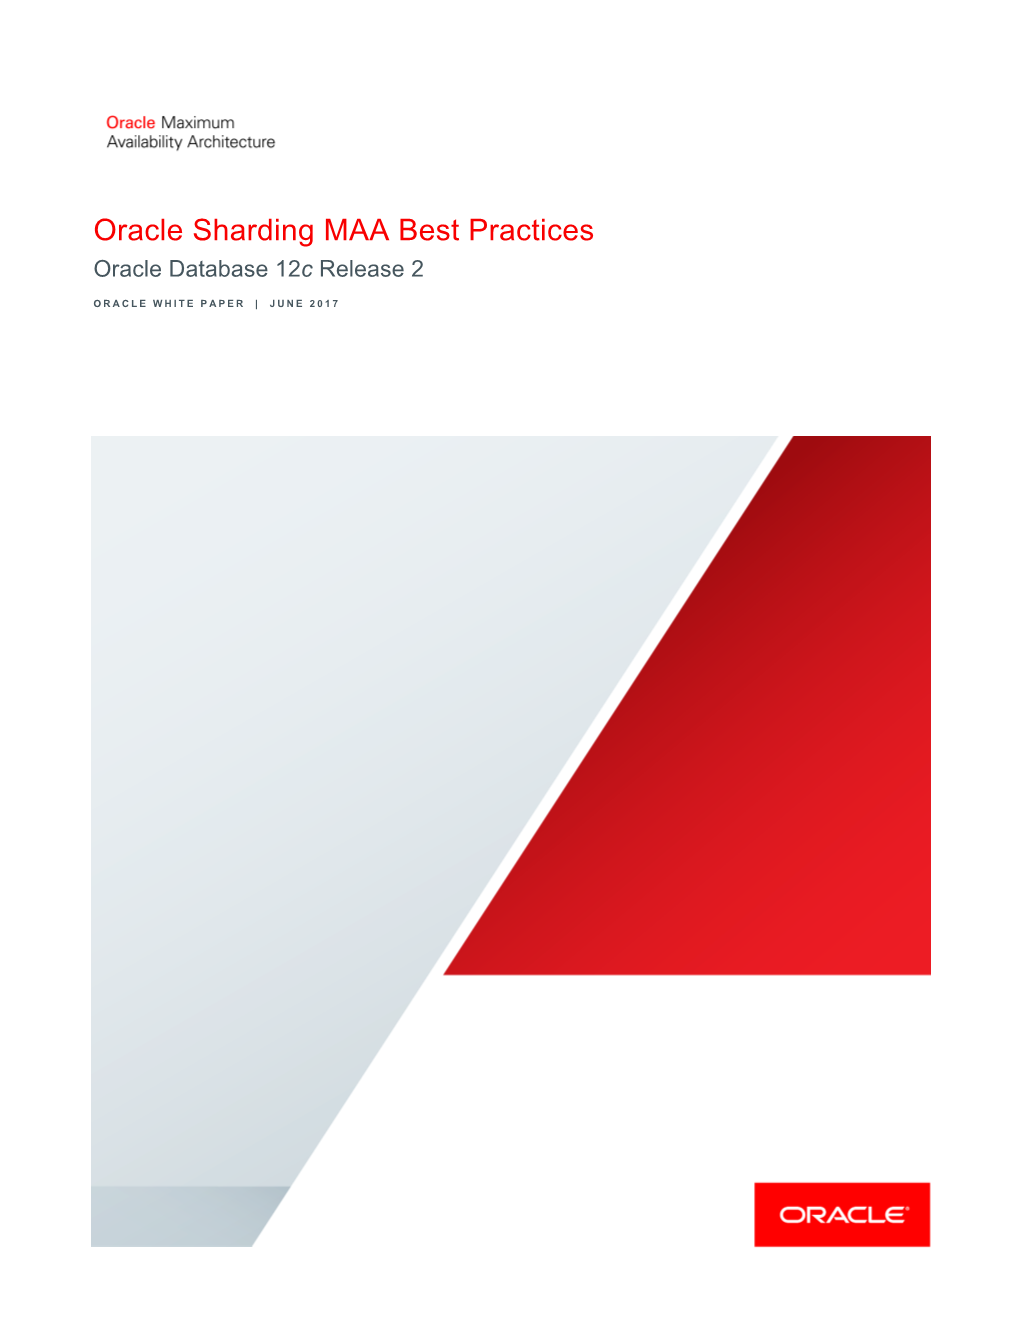 Oracle Sharding MAA Best Practices Oracle Database 12C Release 2